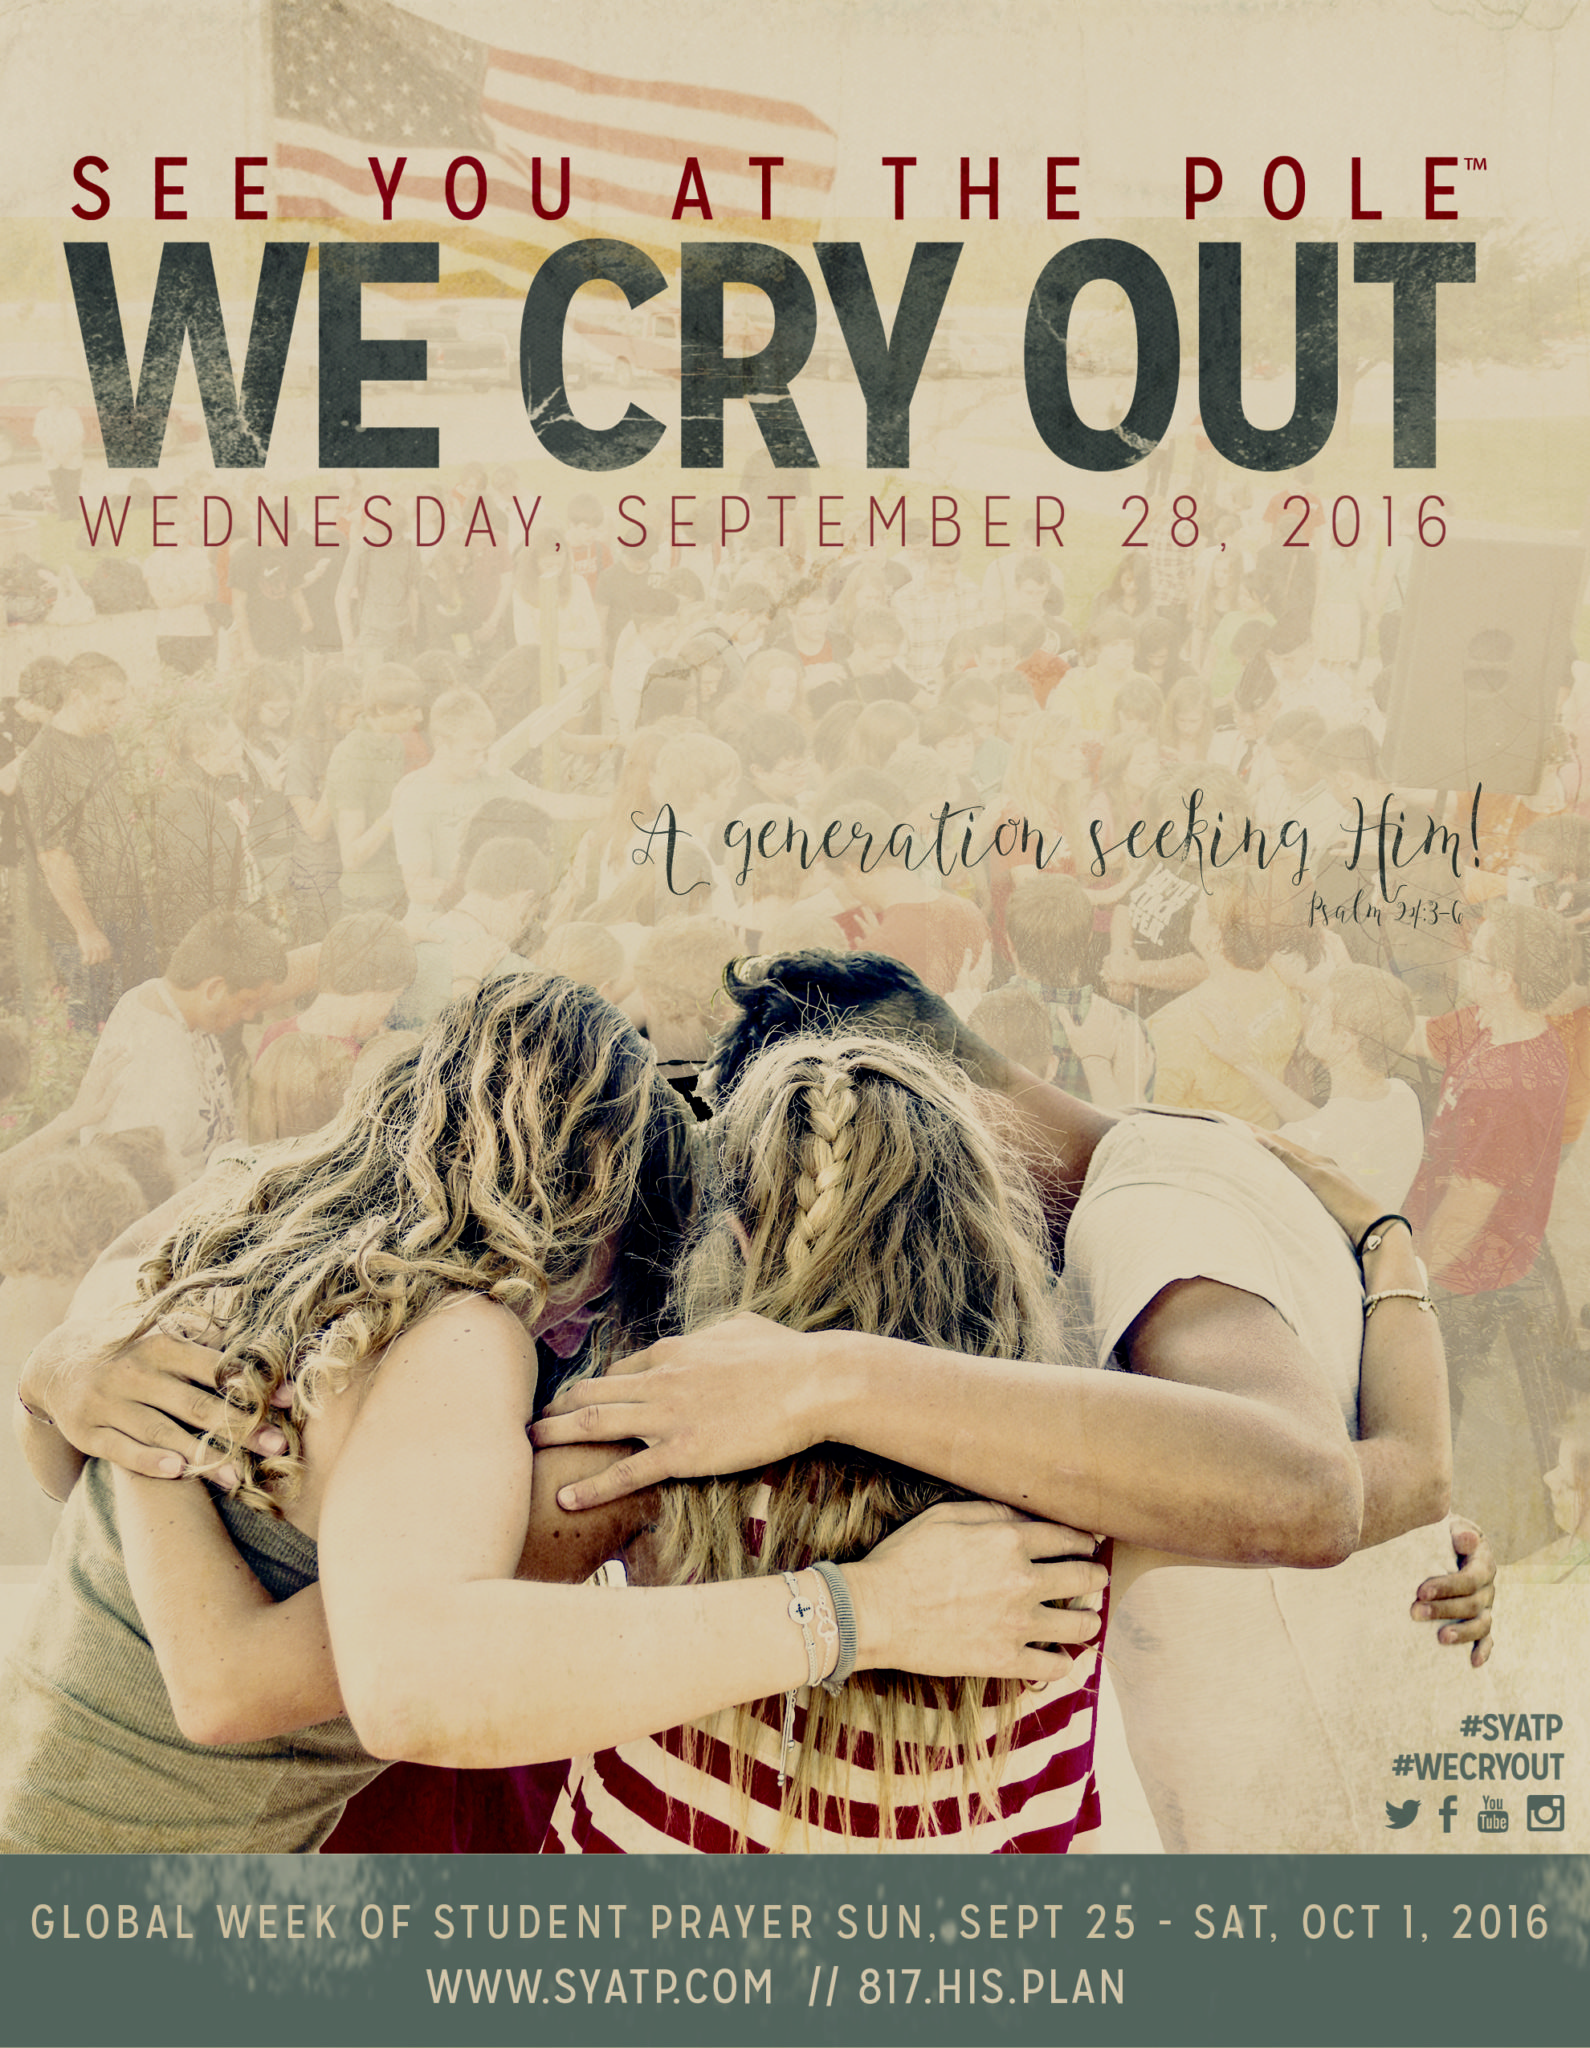 See You At the Pole 2016 We Cry Out Artwork